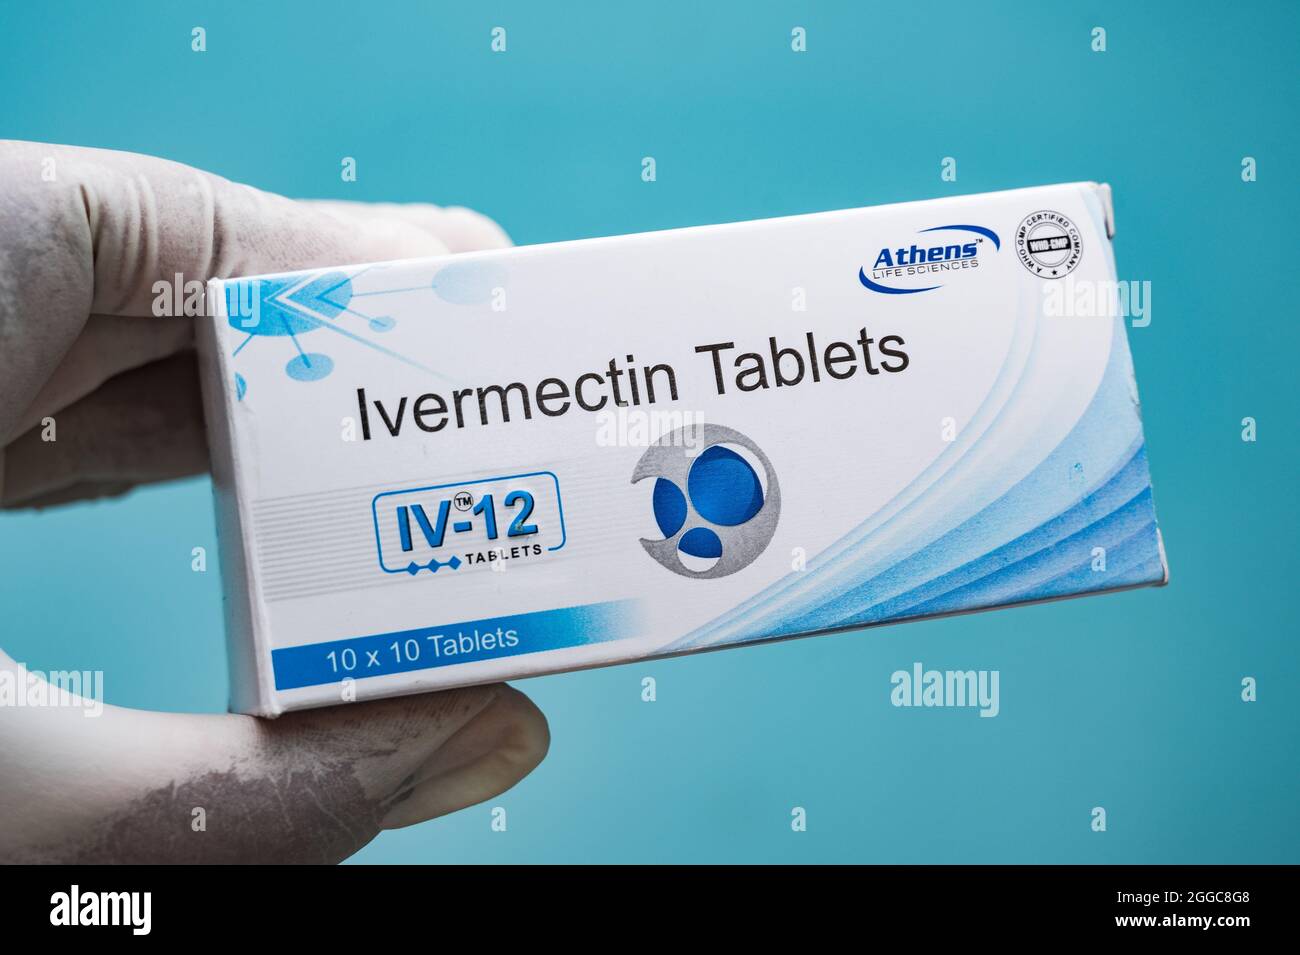 Scientists have warned against taking ivermectin, an anti-parasite drug, as a treatment for Covid-19. Prescriptions for ivermectin have jumped in USA. Stock Photo